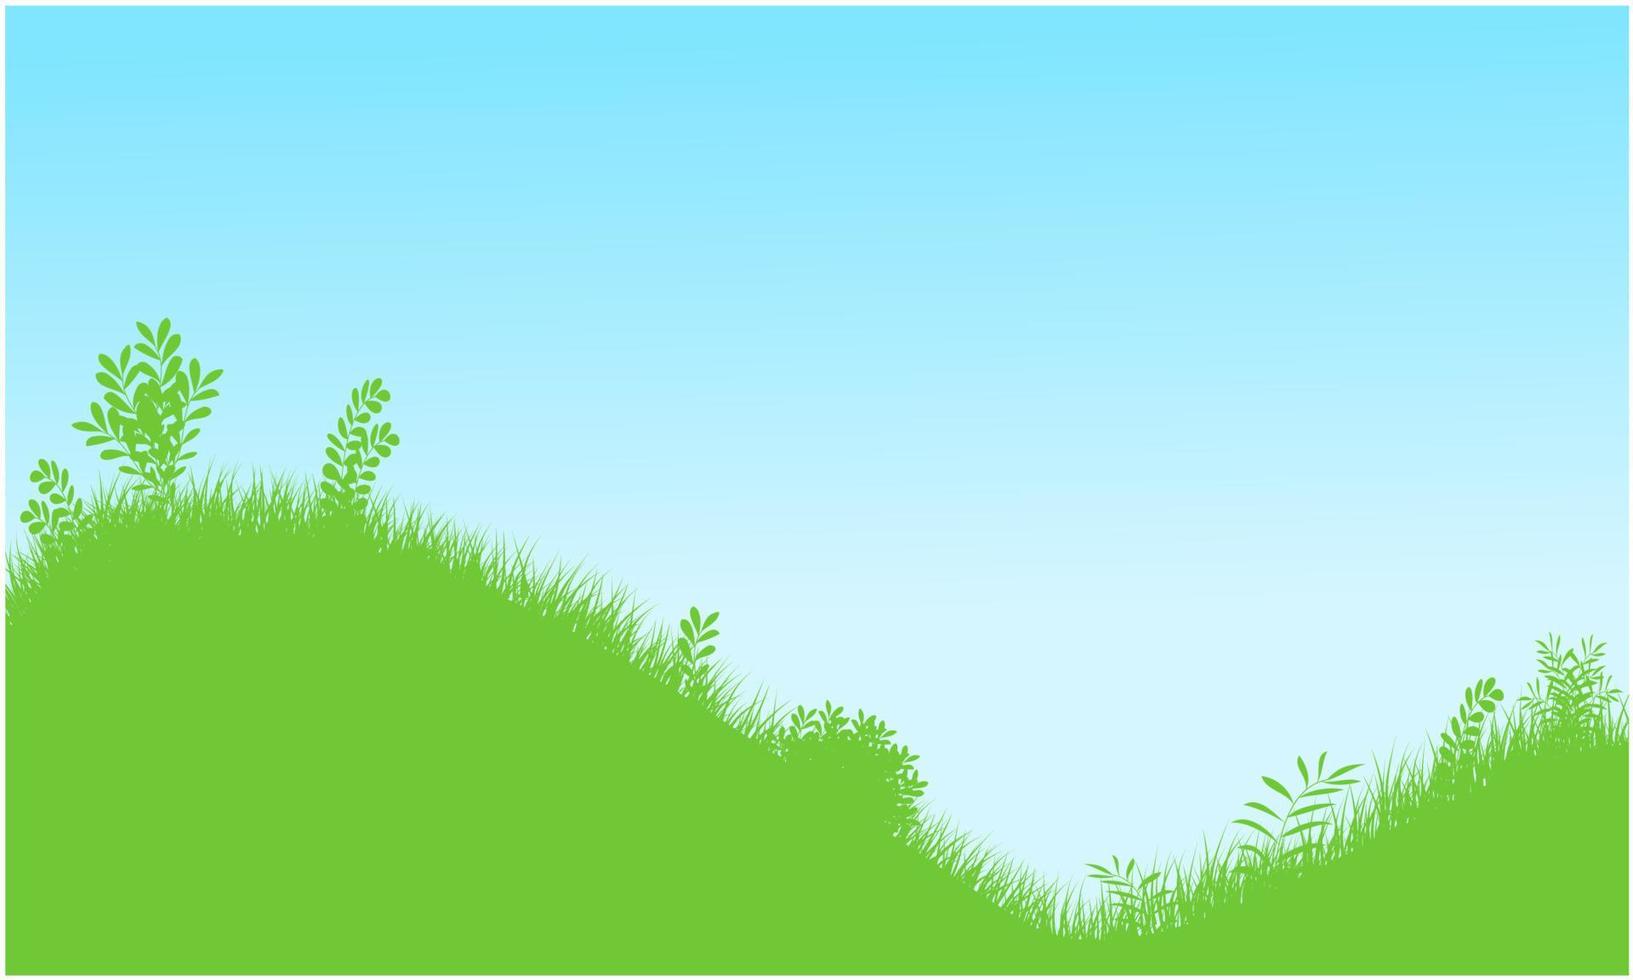 grassy field with blue sky background vector